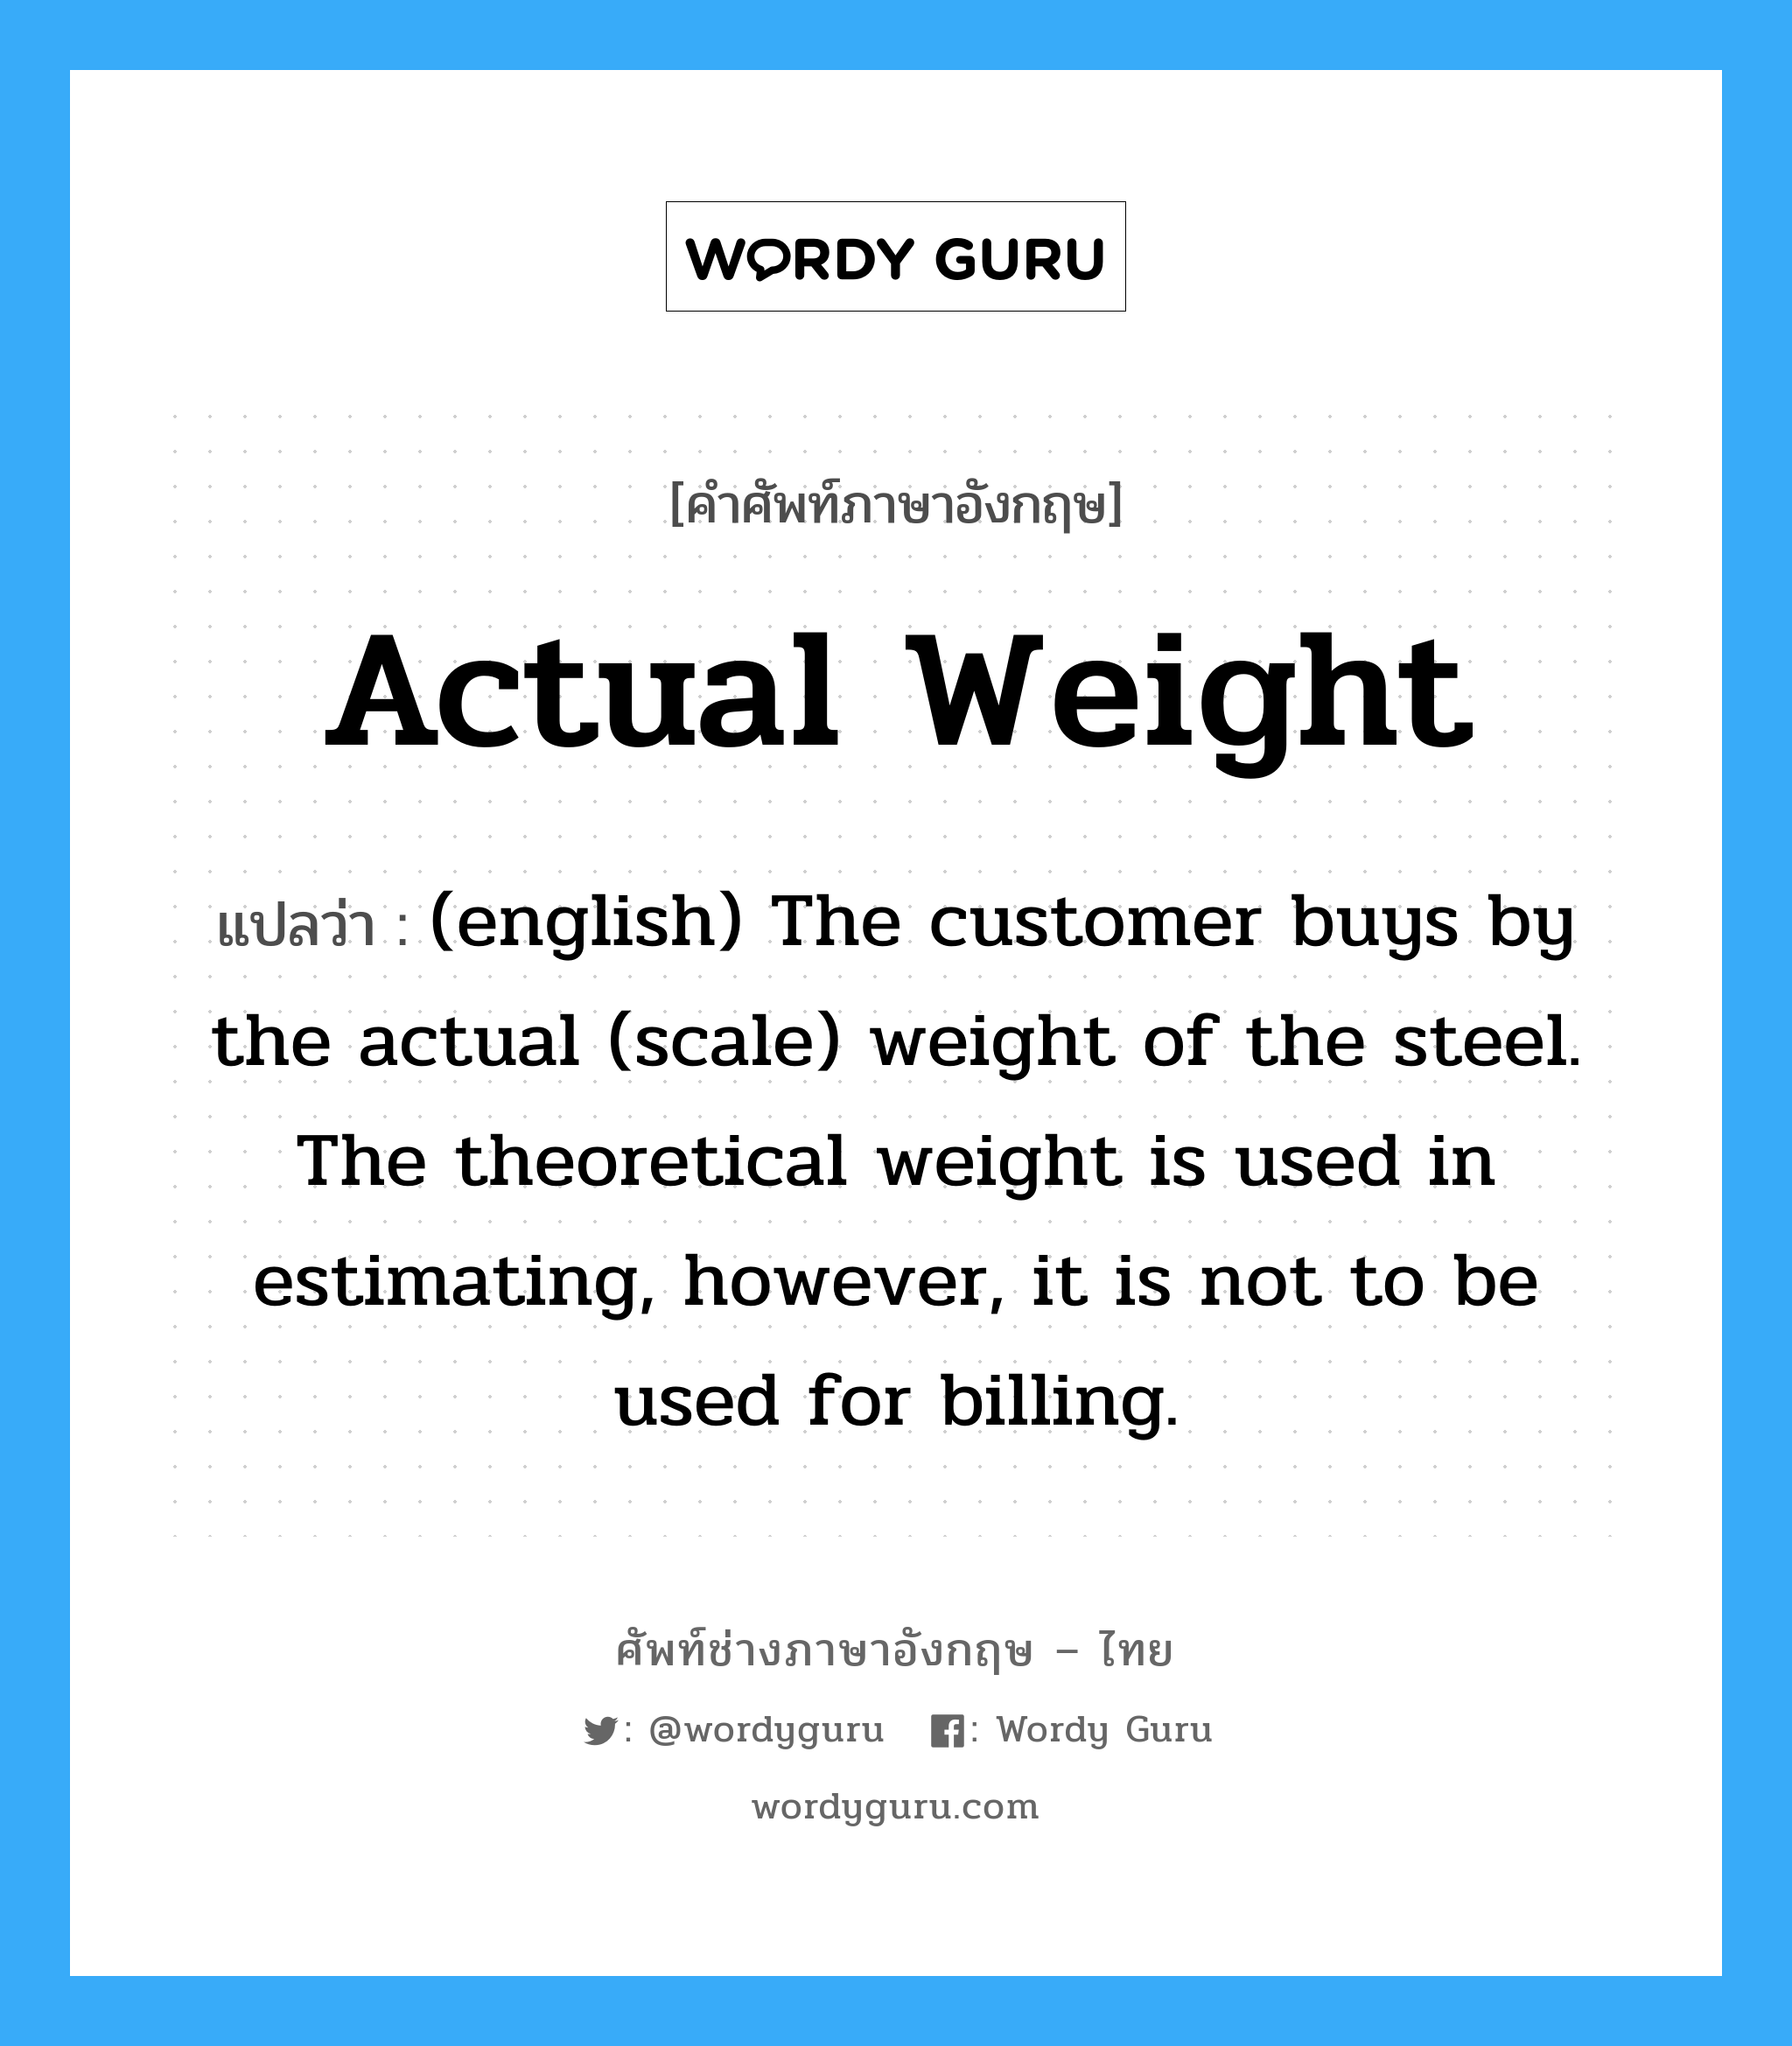 (english) The customer buys by the actual (scale) weight of the steel. The theoretical weight is used in estimating, however, it is not to be used for billing. ภาษาอังกฤษ?, คำศัพท์ช่างภาษาอังกฤษ - ไทย (english) The customer buys by the actual (scale) weight of the steel. The theoretical weight is used in estimating, however, it is not to be used for billing. คำศัพท์ภาษาอังกฤษ (english) The customer buys by the actual (scale) weight of the steel. The theoretical weight is used in estimating, however, it is not to be used for billing. แปลว่า Actual Weight